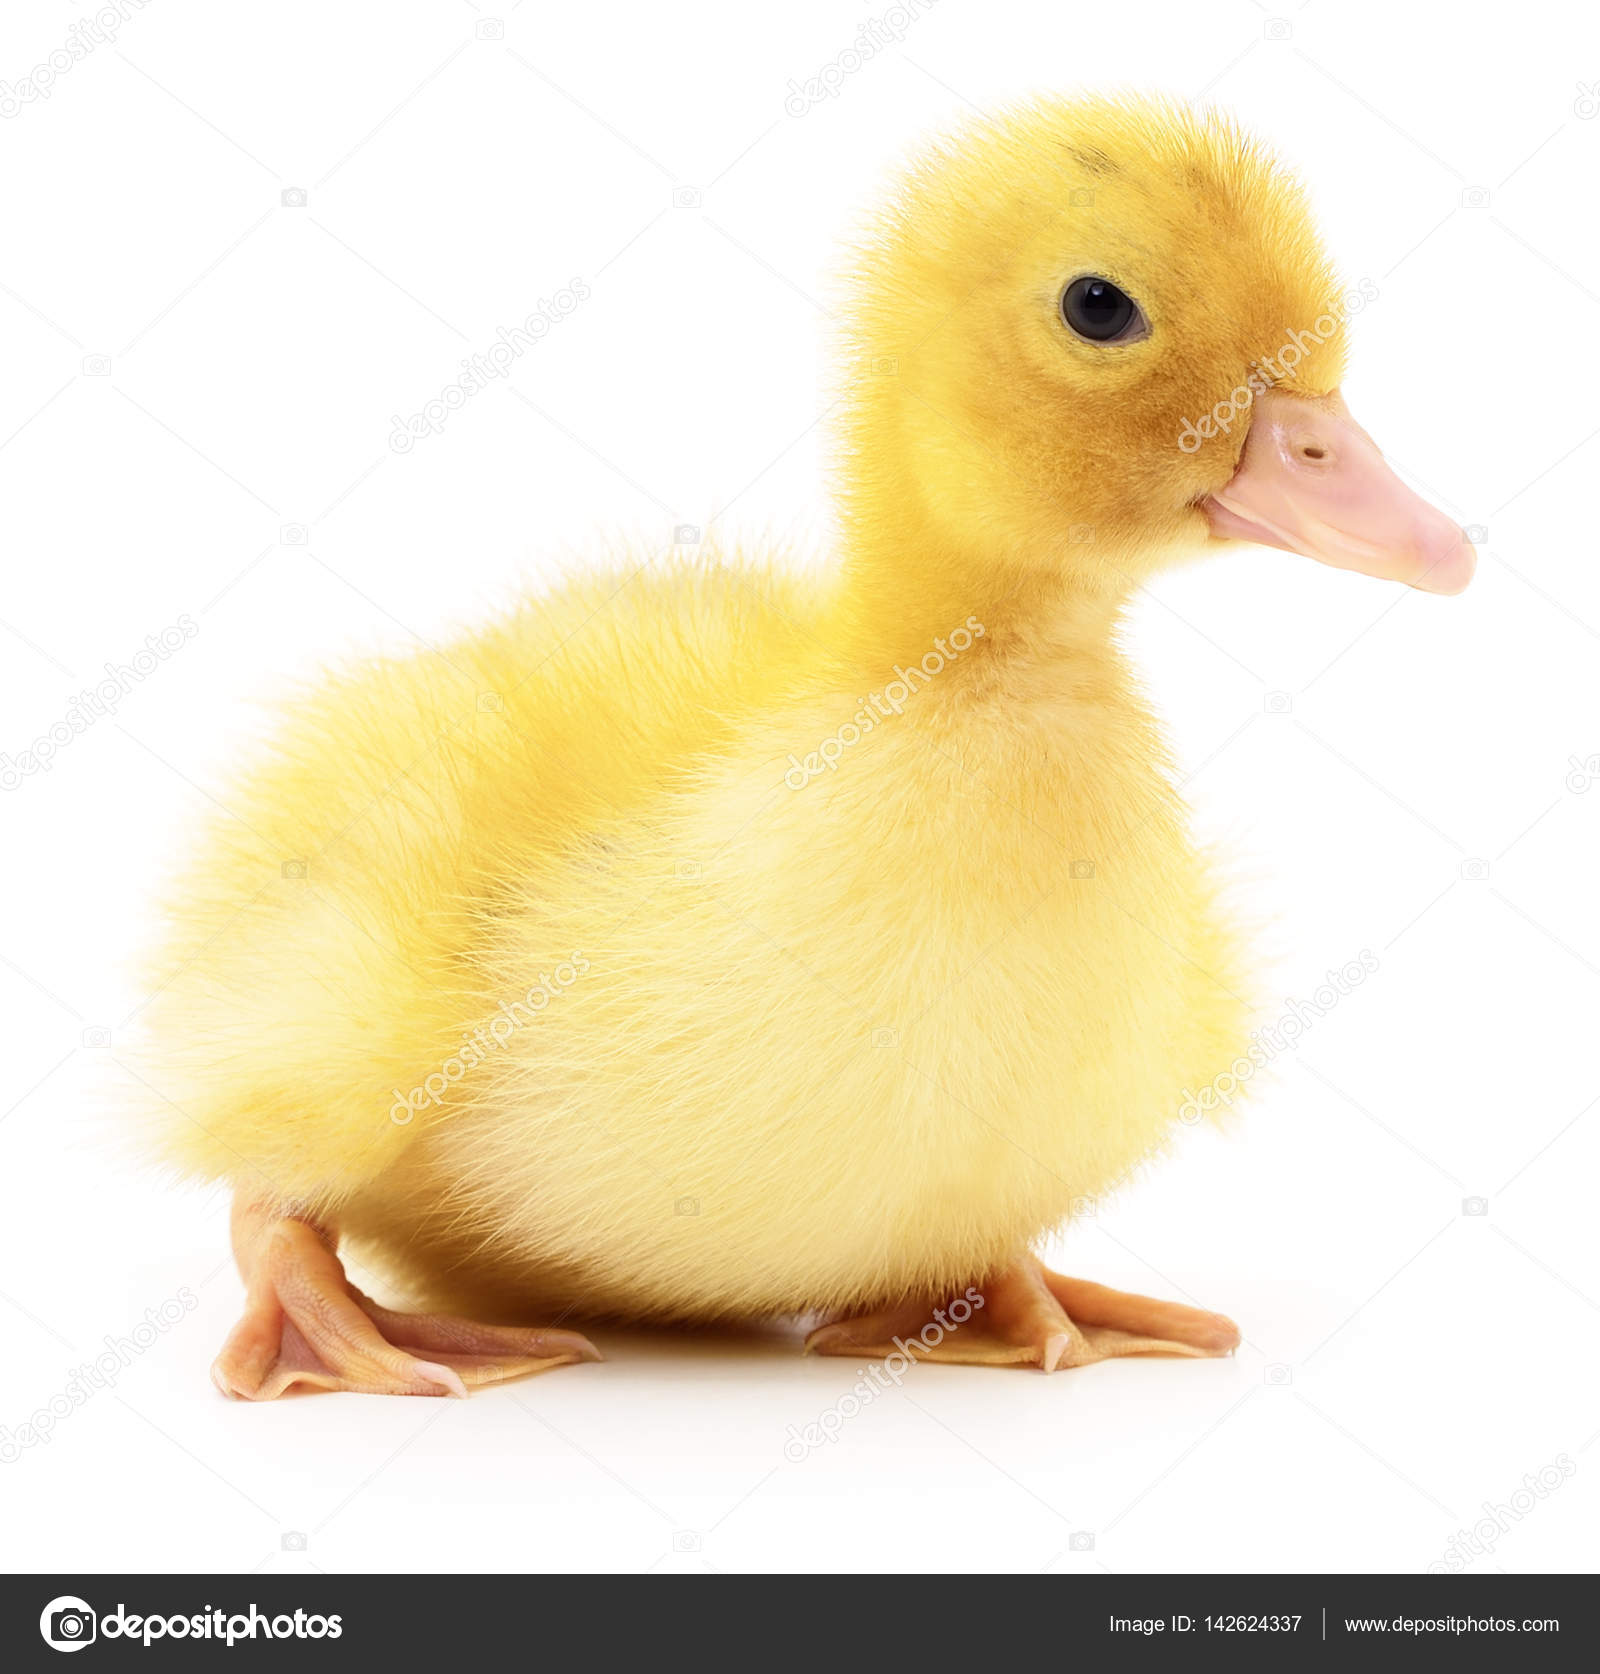 Two yellow ducklings. — Stock Photo © Olhastock #142624337